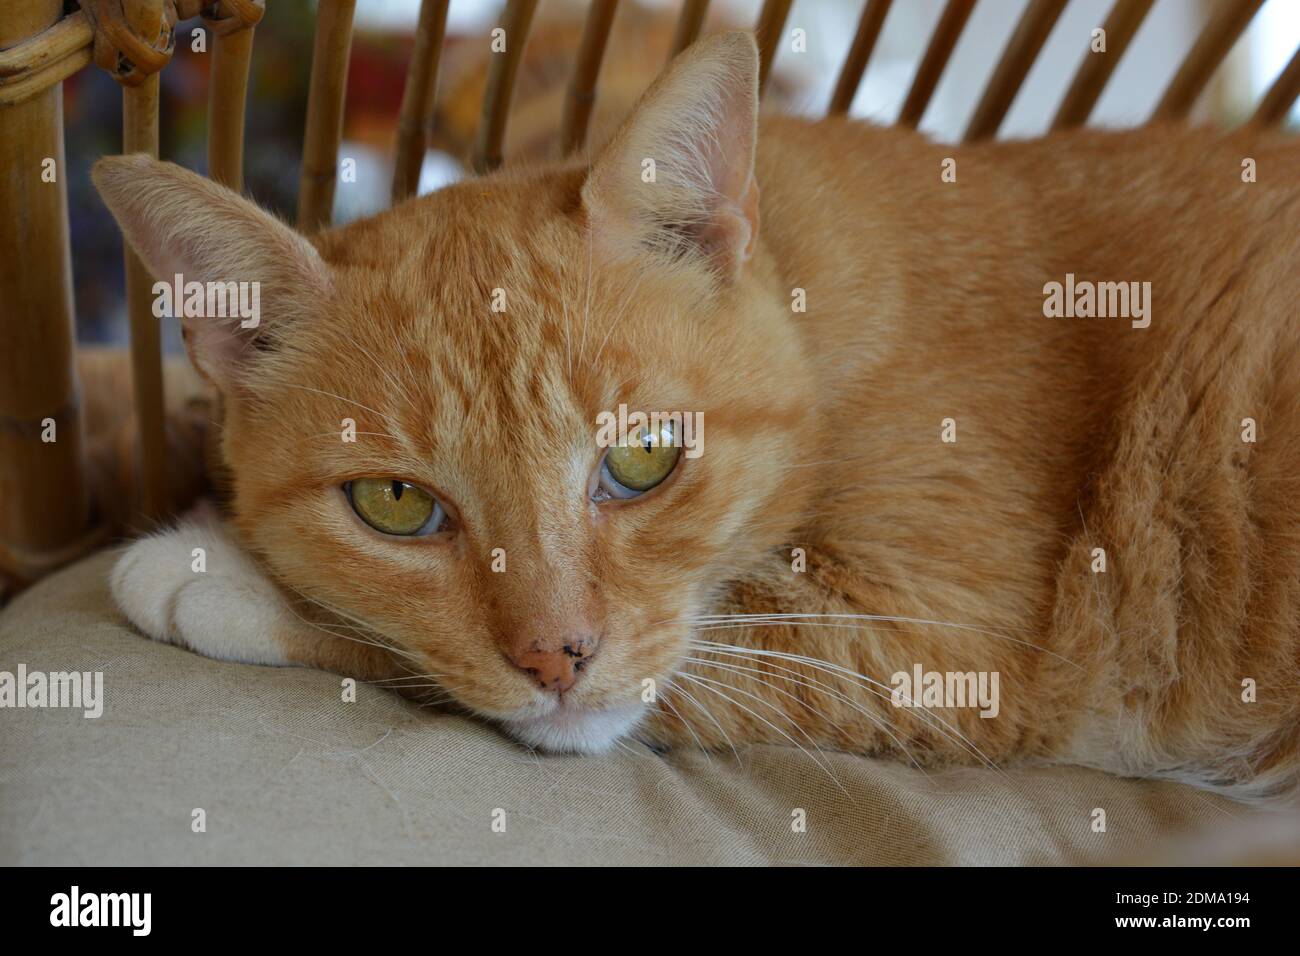 Ginger tabby cat, portrait looking at camera Stock Photo